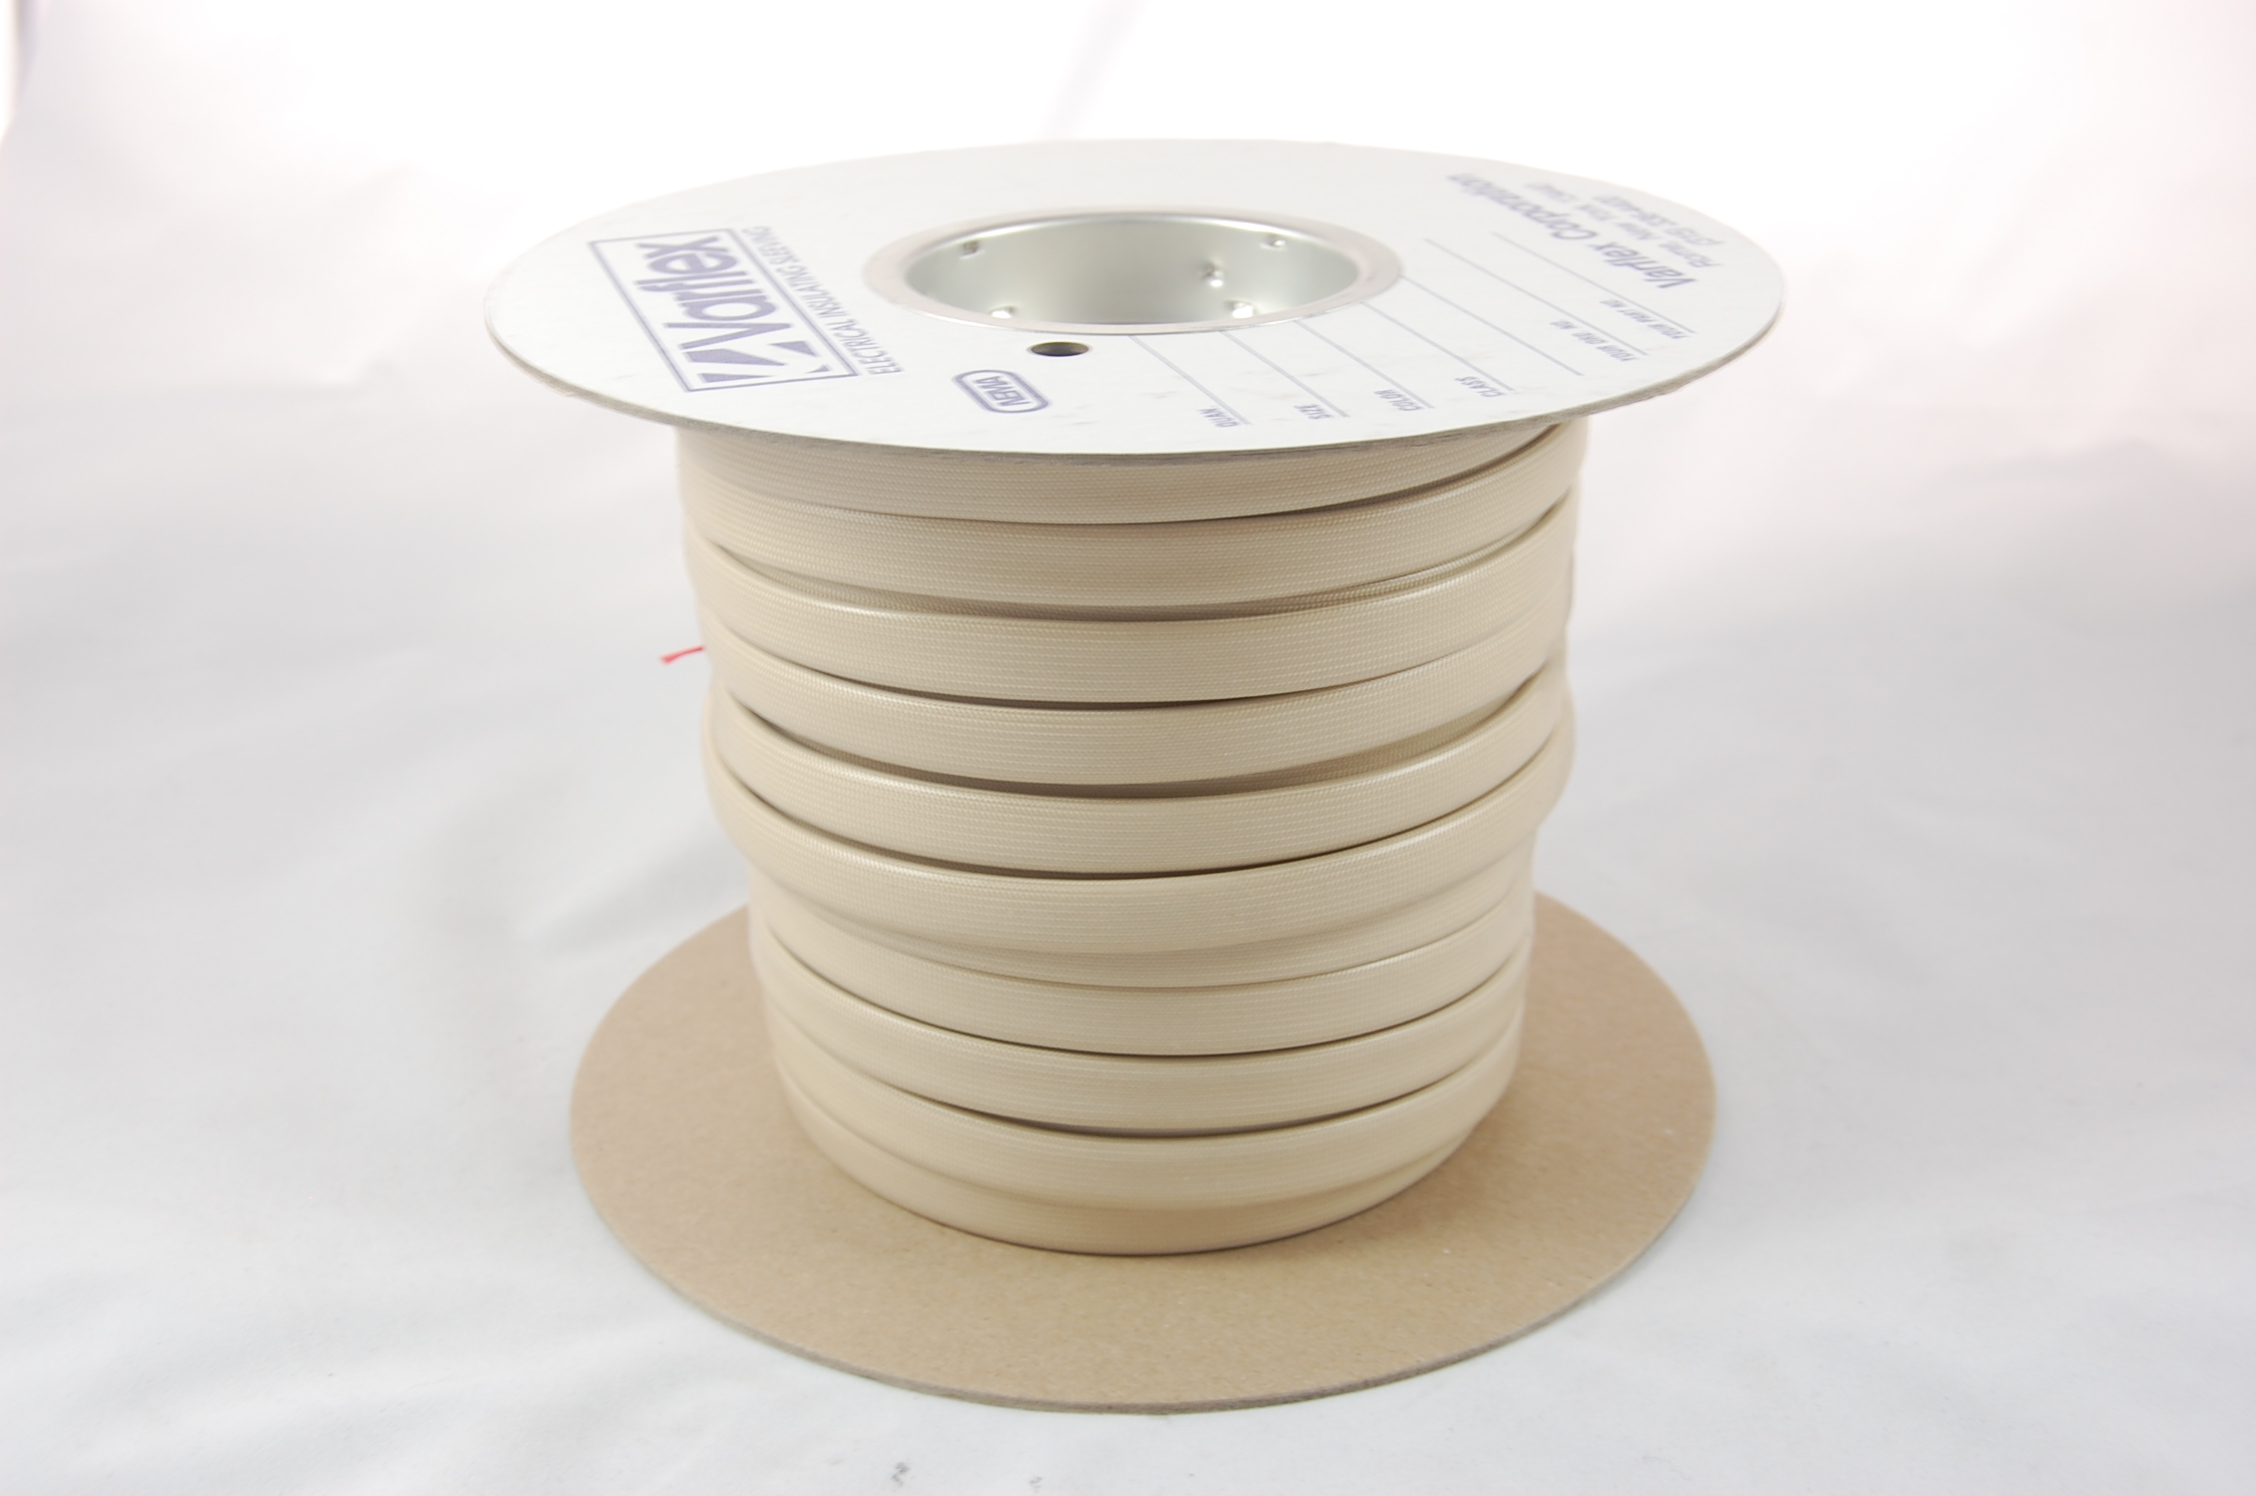 #14 AWG Varglas Silicone Rubber Grade H-A-1 (8000V) High Temperature Silicone Rubber Coated Braided Fiberglass Sleeving 200°C, natural, 500 FT per spool